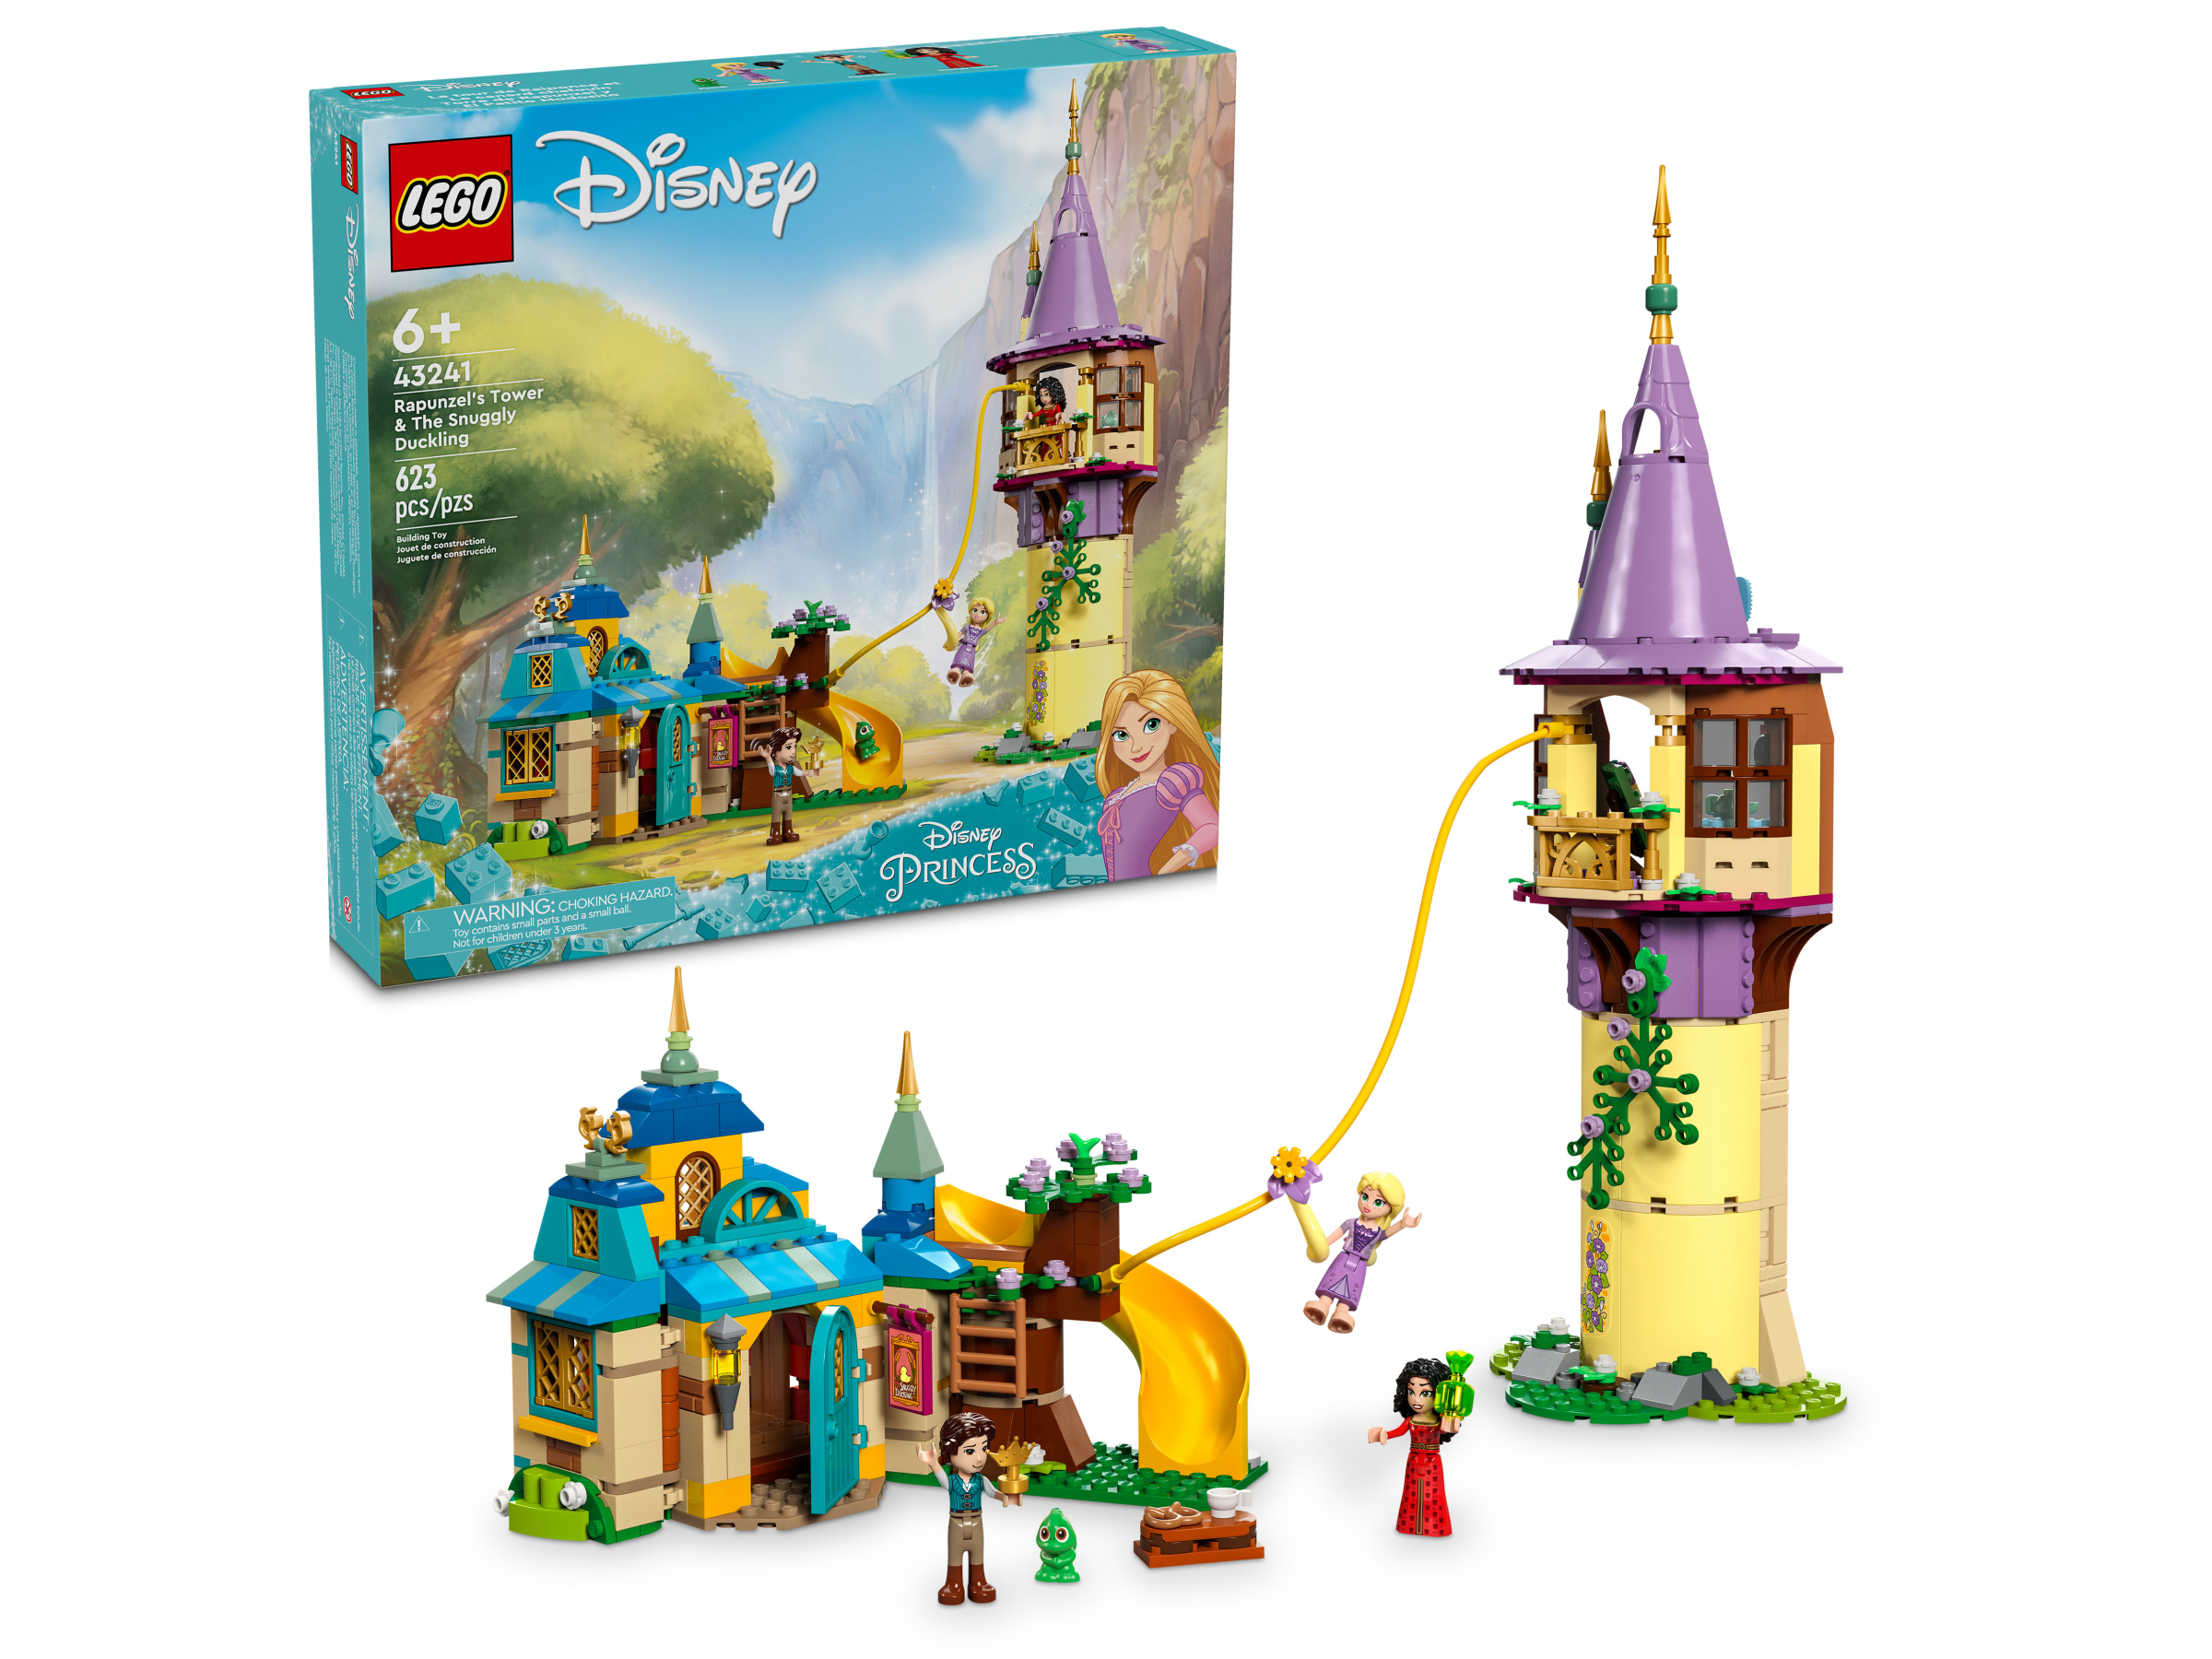 Rapunzel's Tower & The Snuggly Duckling 43241